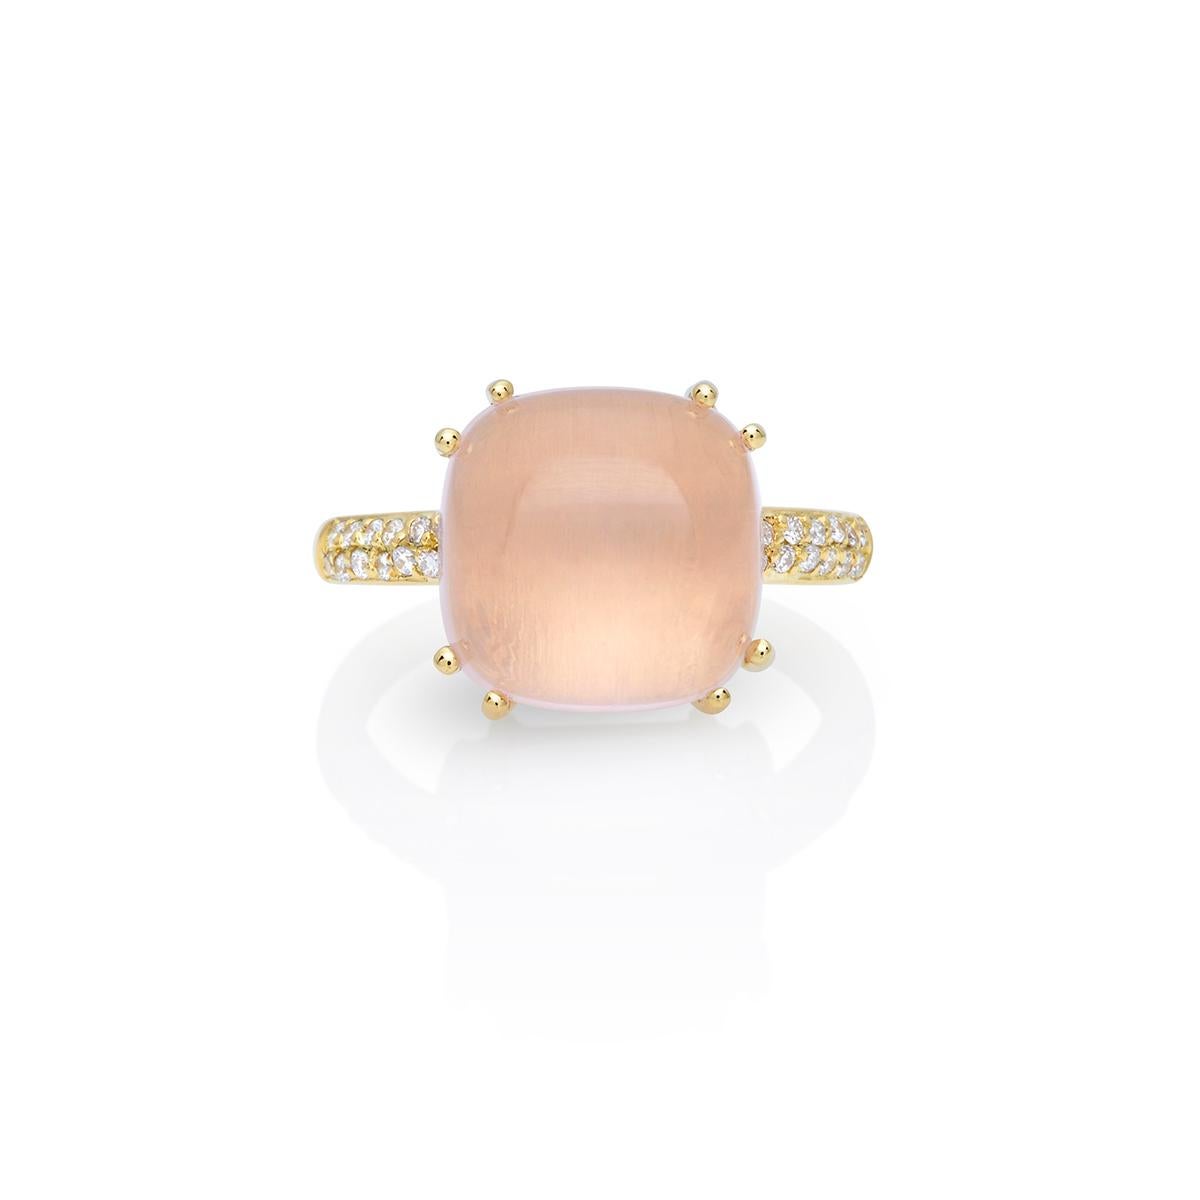 Ring 18Kt yellow gold, with rose quartz and diamonds
An exquisite handcrafted 18kt yellow gold with Rose Quartz - the stone of love- and diamonds ring that defines elegance and refined femininity. This unique piece is the perfect gift for youe loved